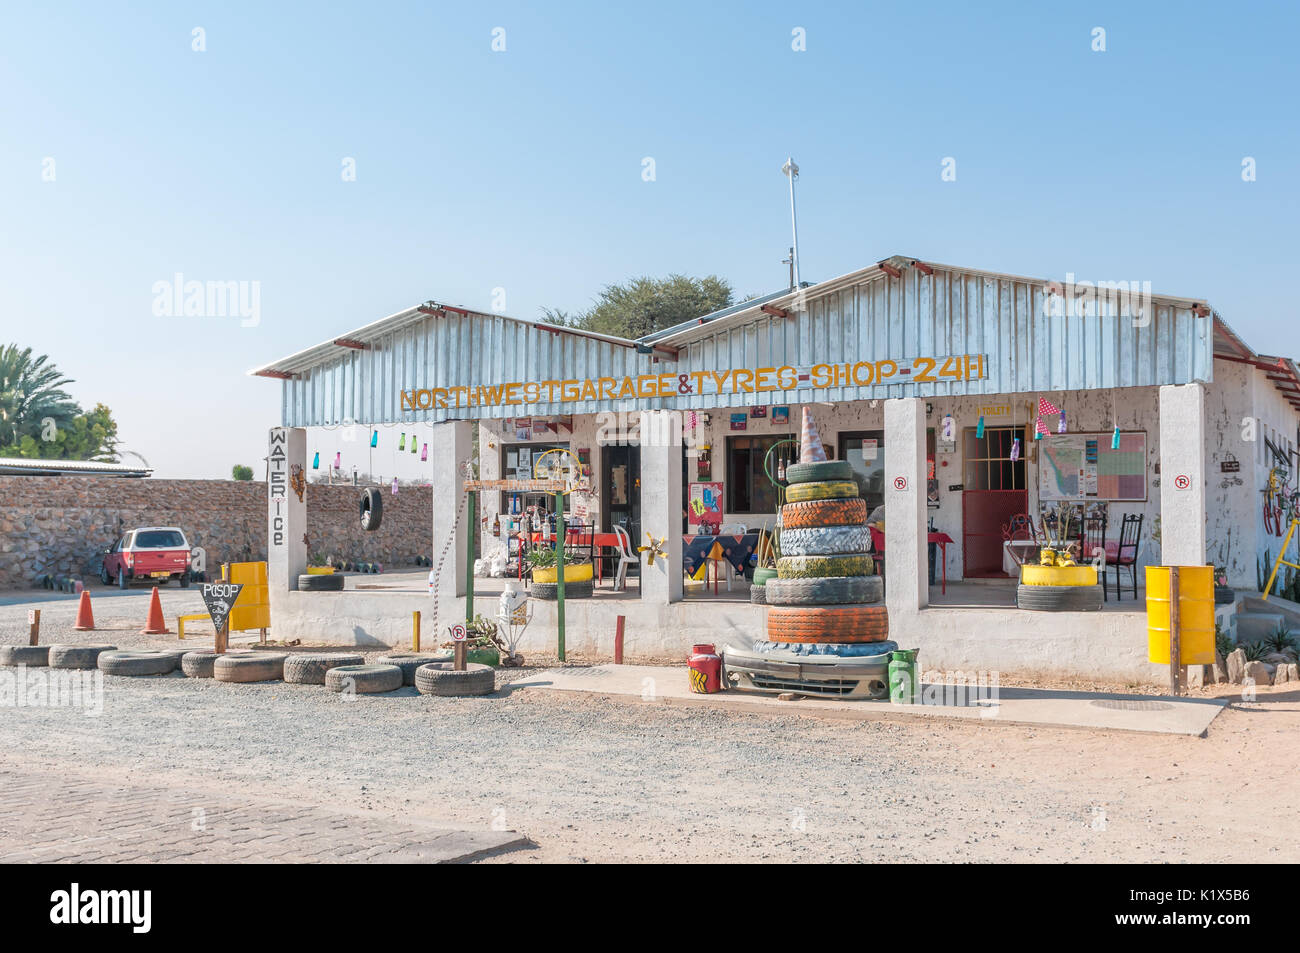 KAMANJAB, NAMIBIA - JUNE 27, 2017: A cafe and tyre shop in Kamanjab, a small town in the Kunene Region of Namibia Stock Photo